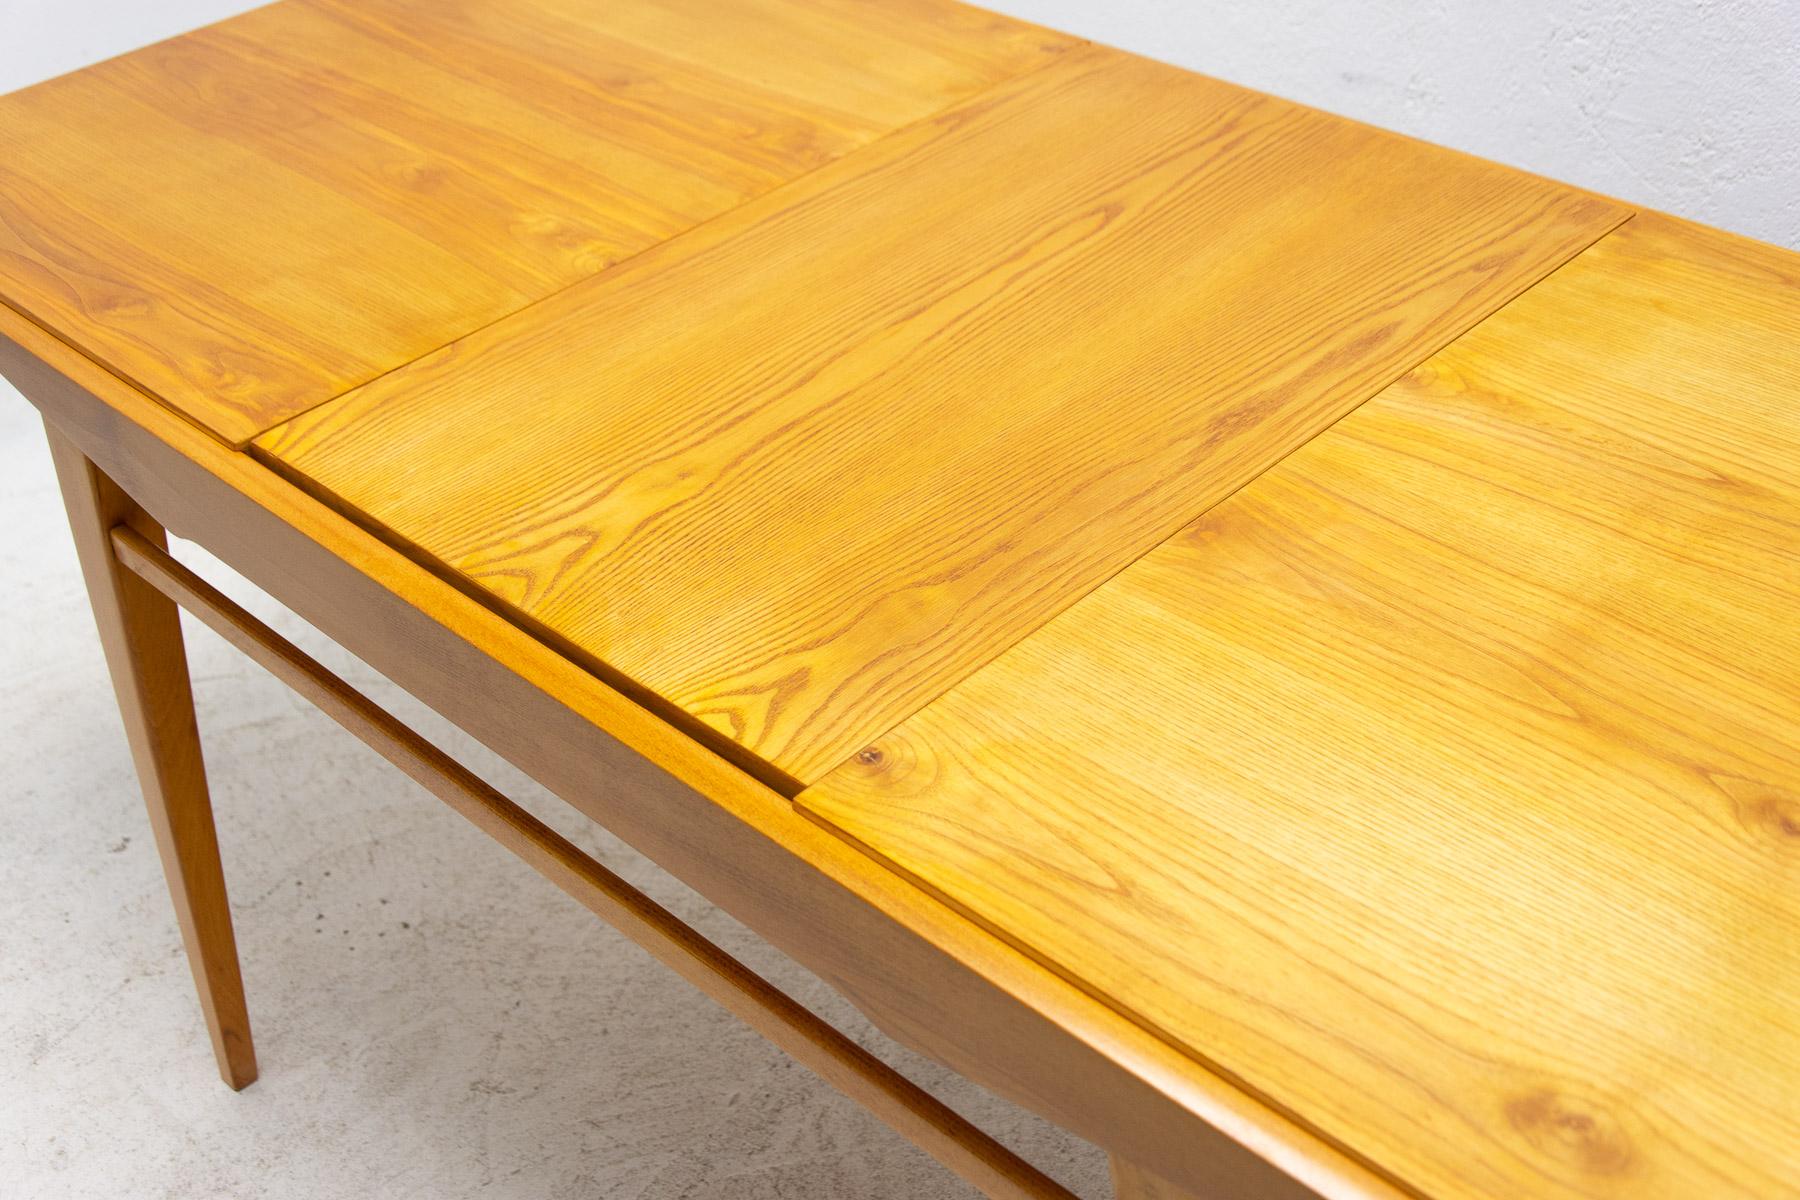 Midcentury Folding Dining Table by Bohumil Landsman for Jitona, 1970s For Sale 8